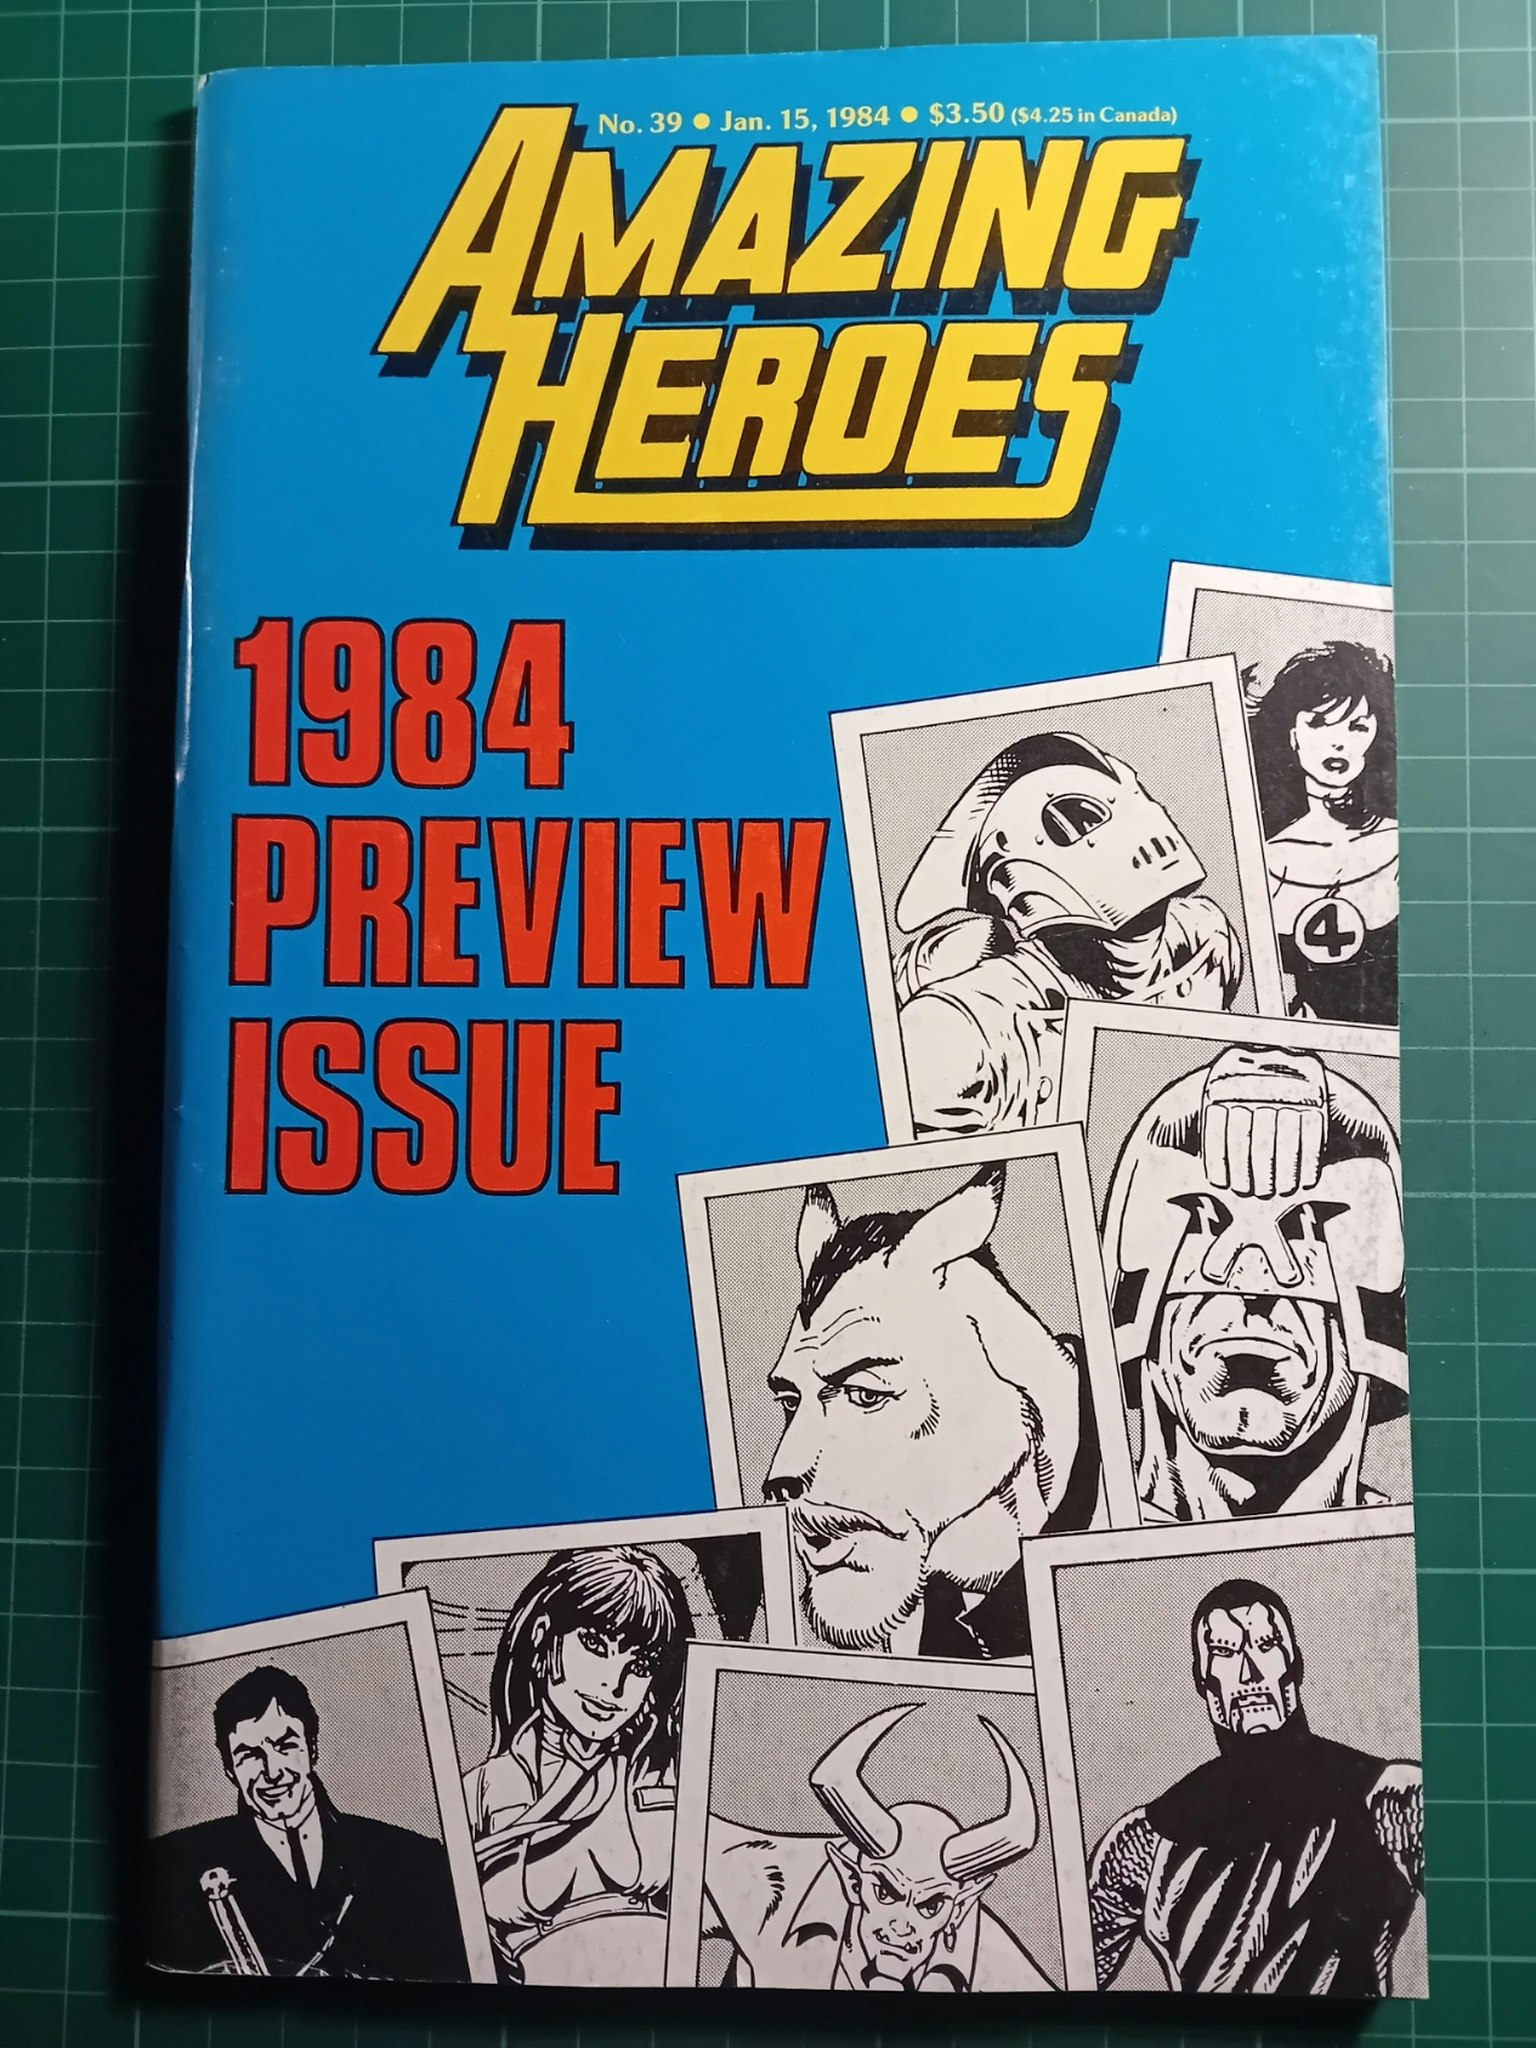 Amazing Heroes #039 1984 Preview issue